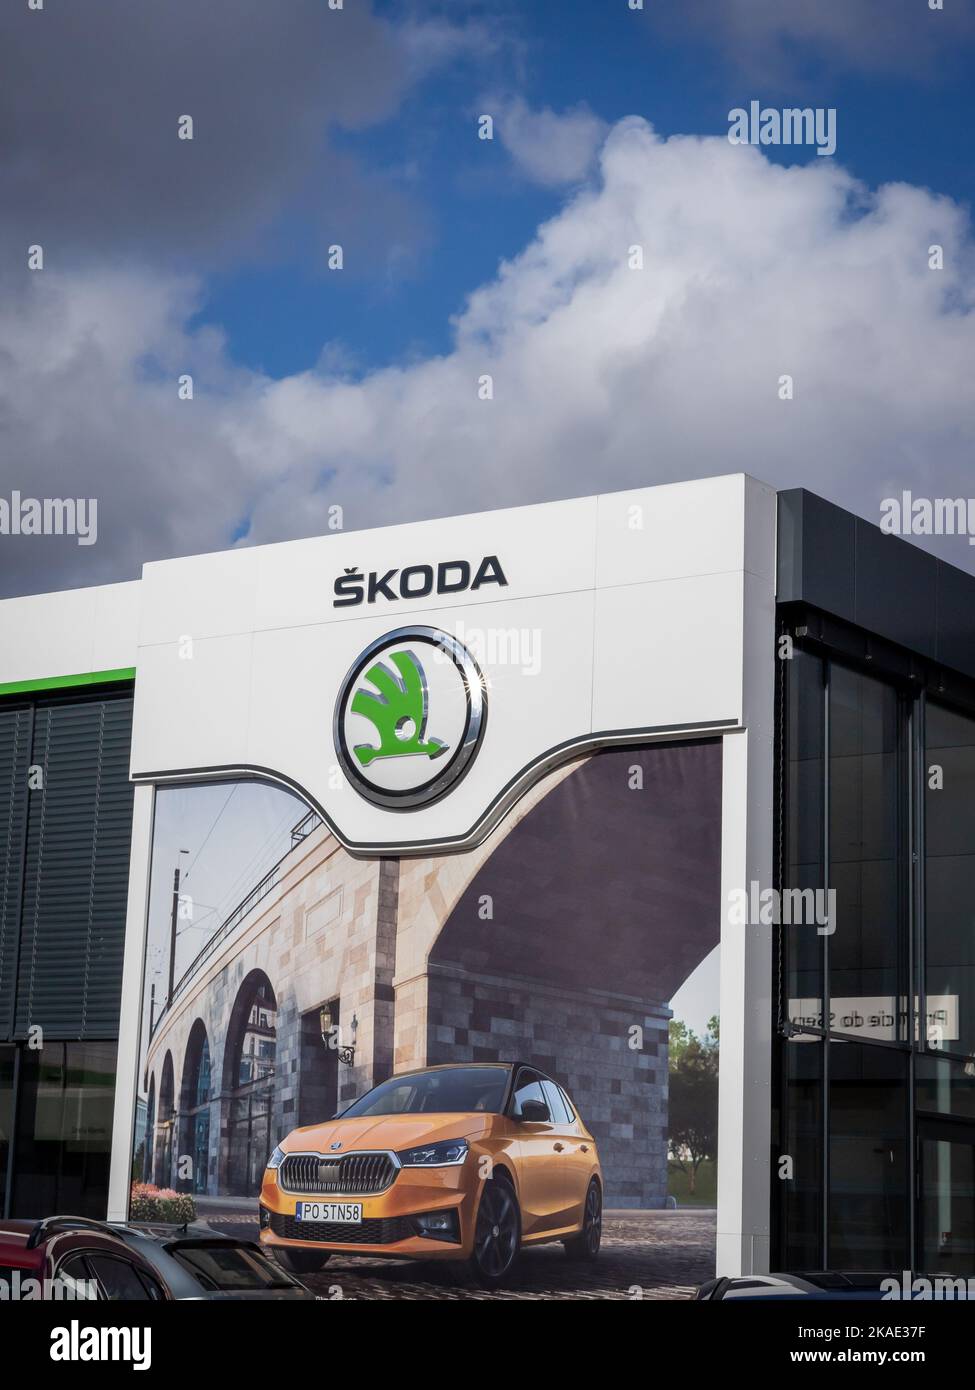 Wroclaw, Poland - February 19, 2022: Company store building with an emblem of Skoda Auto, Czech automobile manufacturer. No people, cloudy sky. Stock Photo